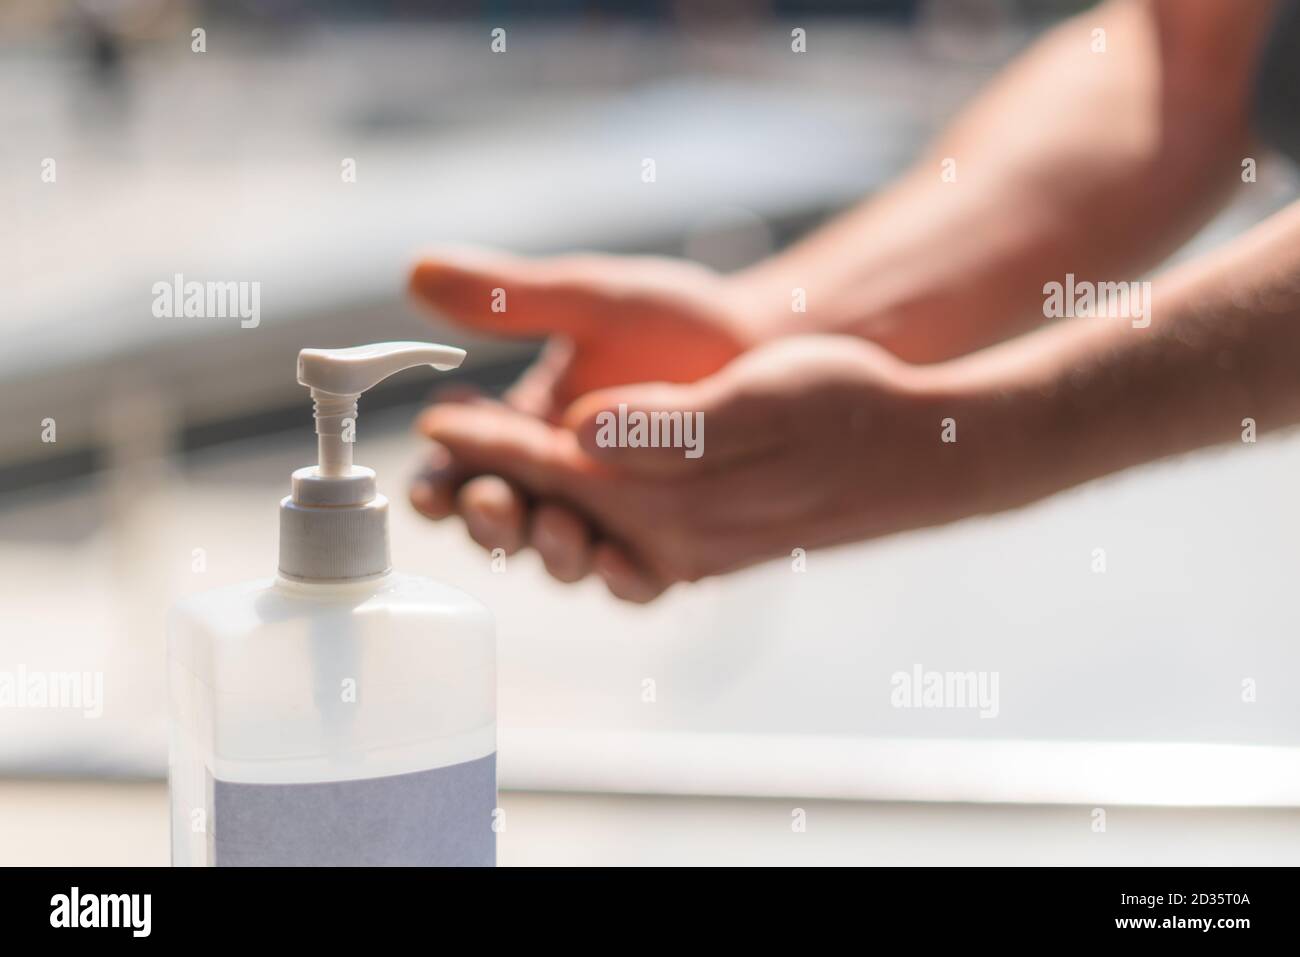 Person using hand sanitizer gel in public. Hand pressing antibacterial lotion bottle outside. Close up view of antiseptic being used in the street. Stock Photo